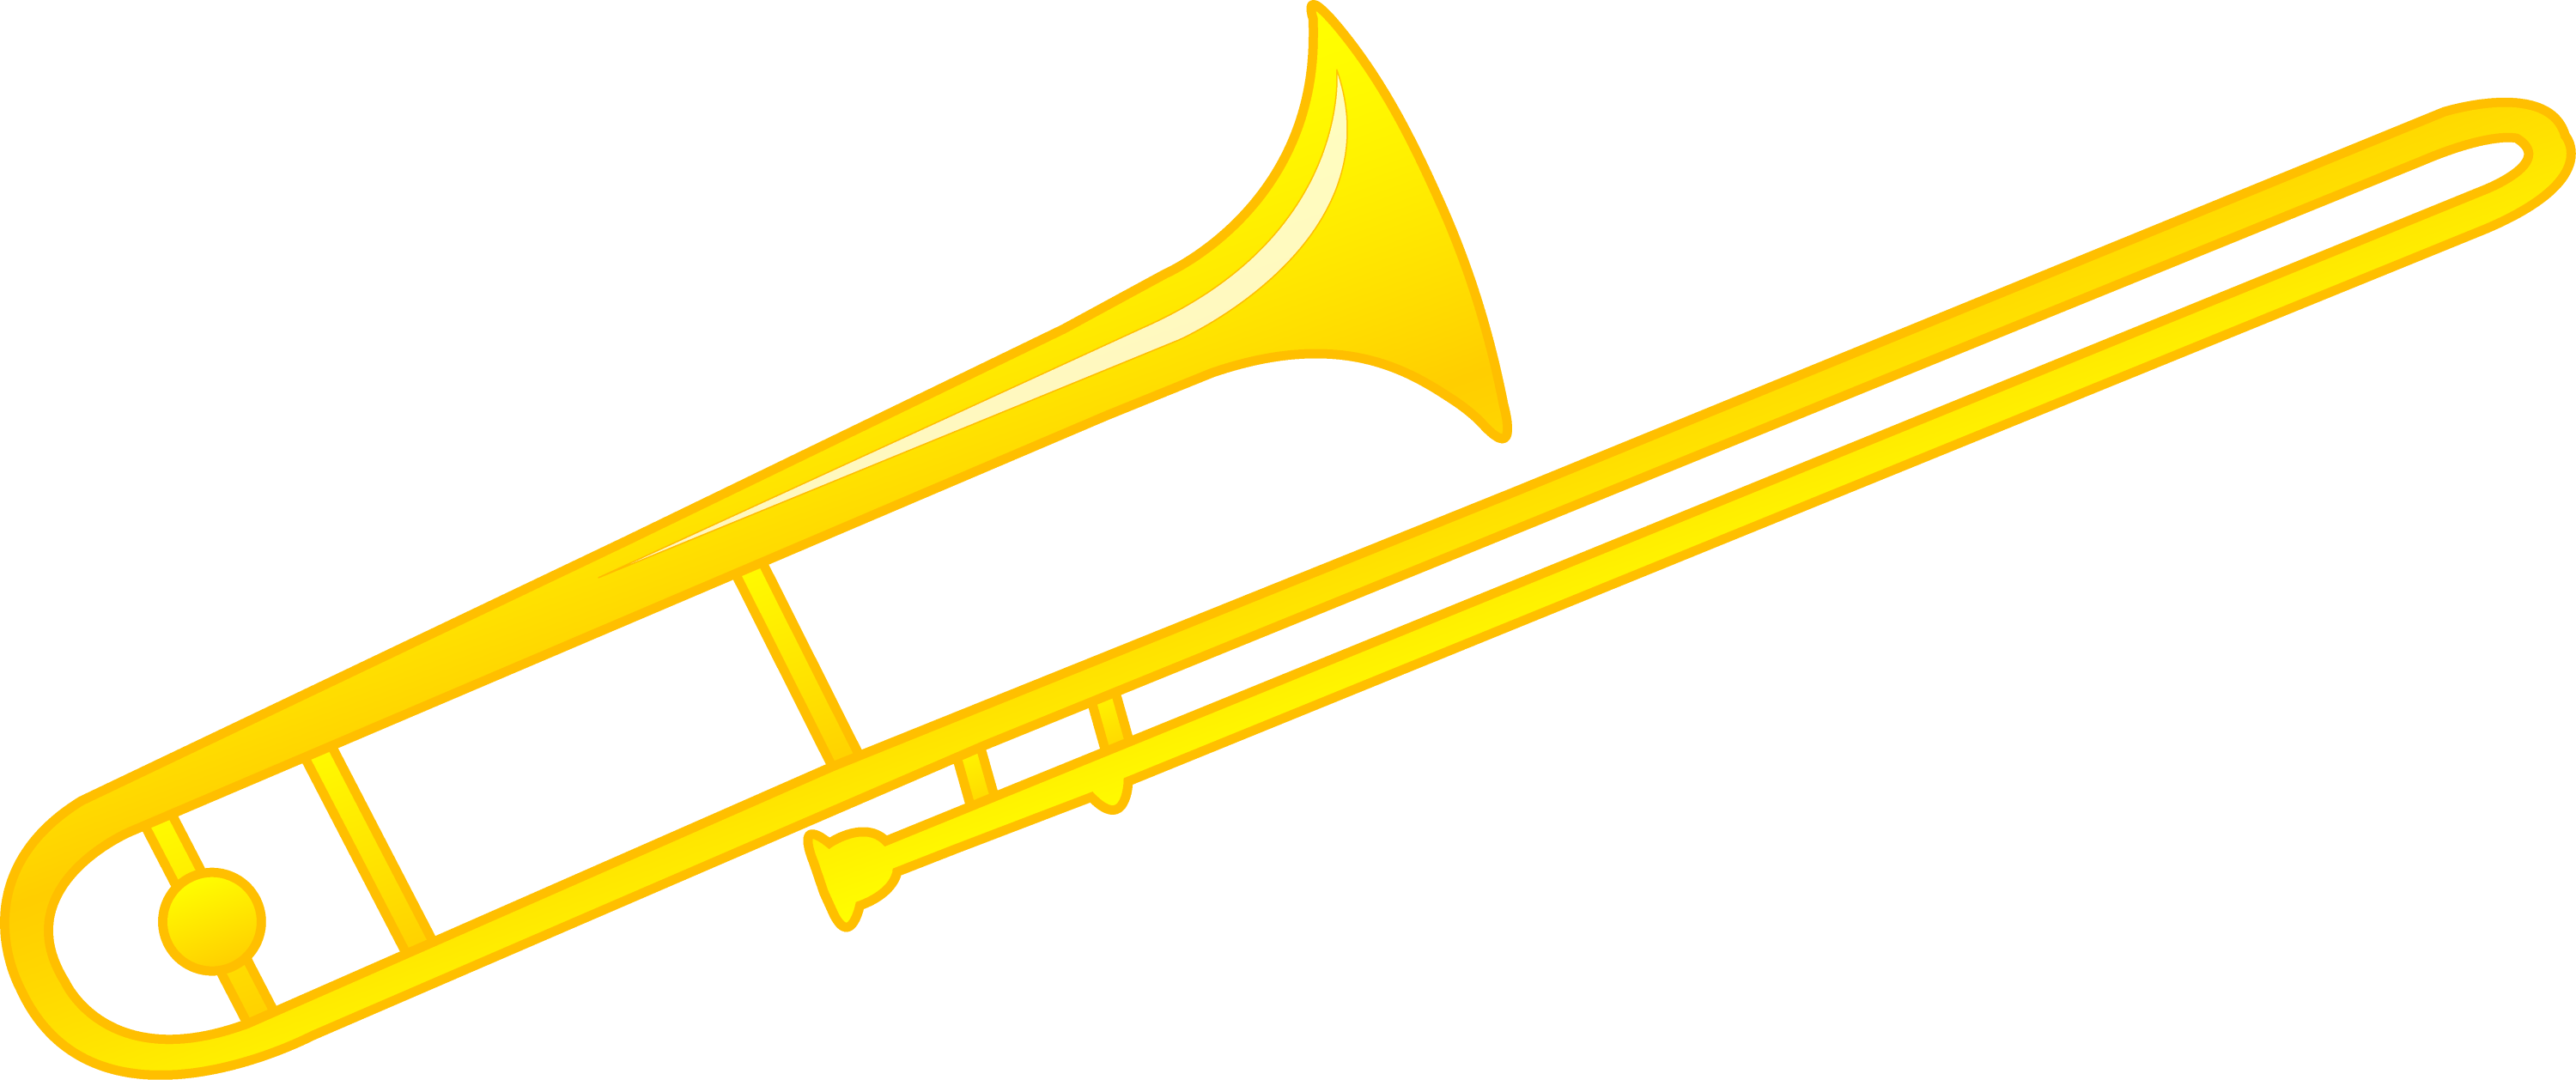 clipart musical instruments free - photo #30